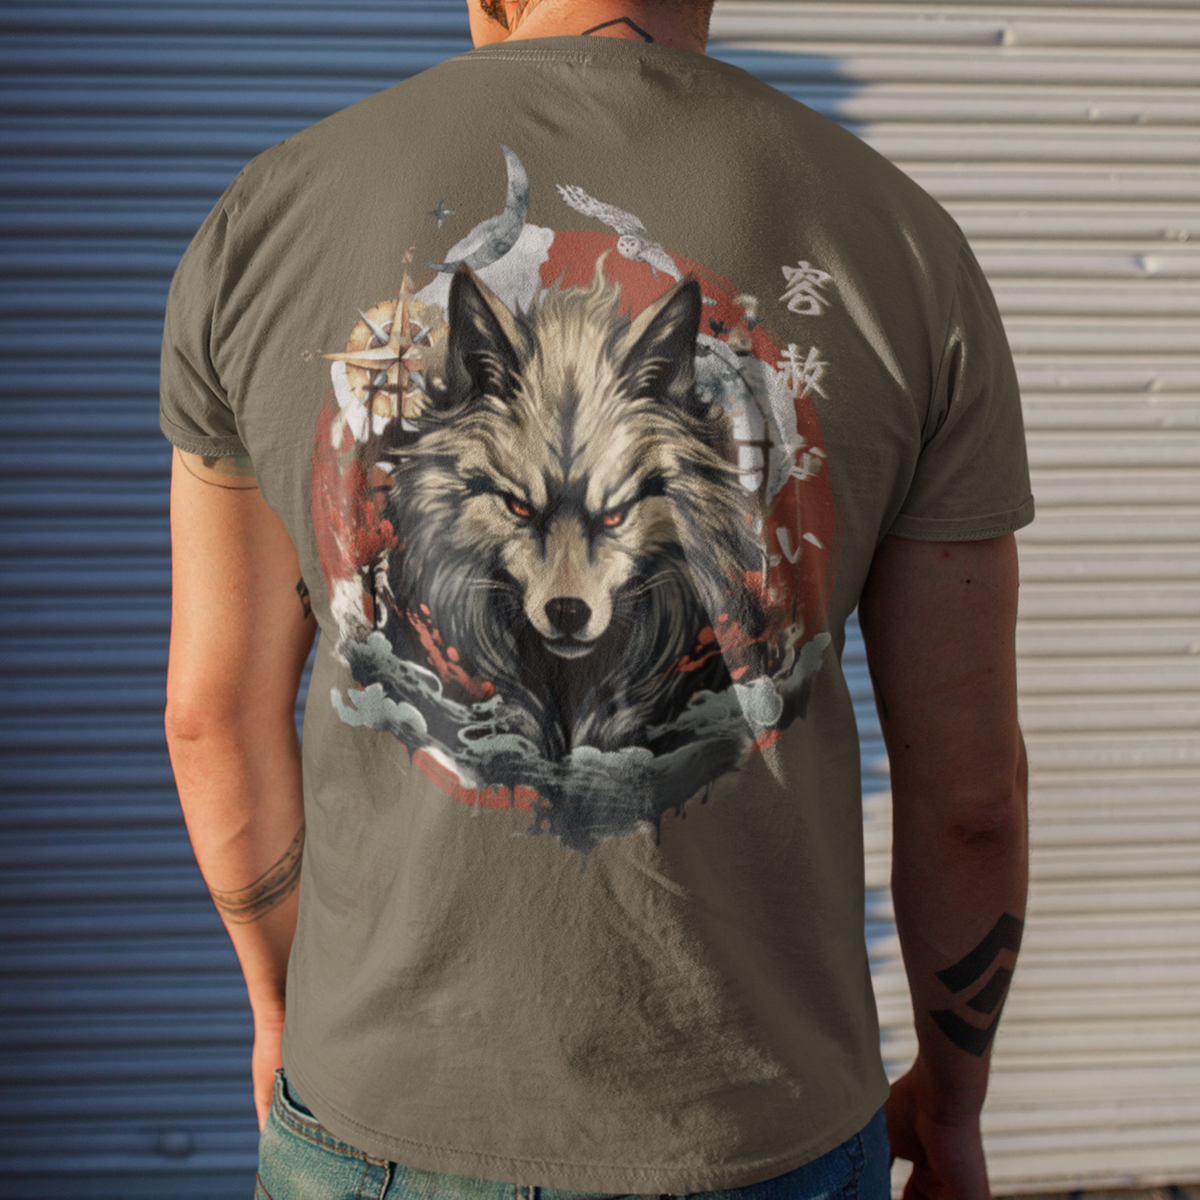 Army- Japanese Wolf T-Shirt, Cultural Fashion, Folklore Inspired, Nature Motif, Compass Design, Symbolic Apparel, Mythical Creatures, Artistic Tee, Intricate Prints, Storytelling Fashion, Traditional Art, Adventure Ready, Unique Graphic, Heritage Style, Compass Rose, Mystical Symbolism, Wolf Spirit. Navigational Theme, Cultural Fusion, Statement Wear, gif for him, gift for dad